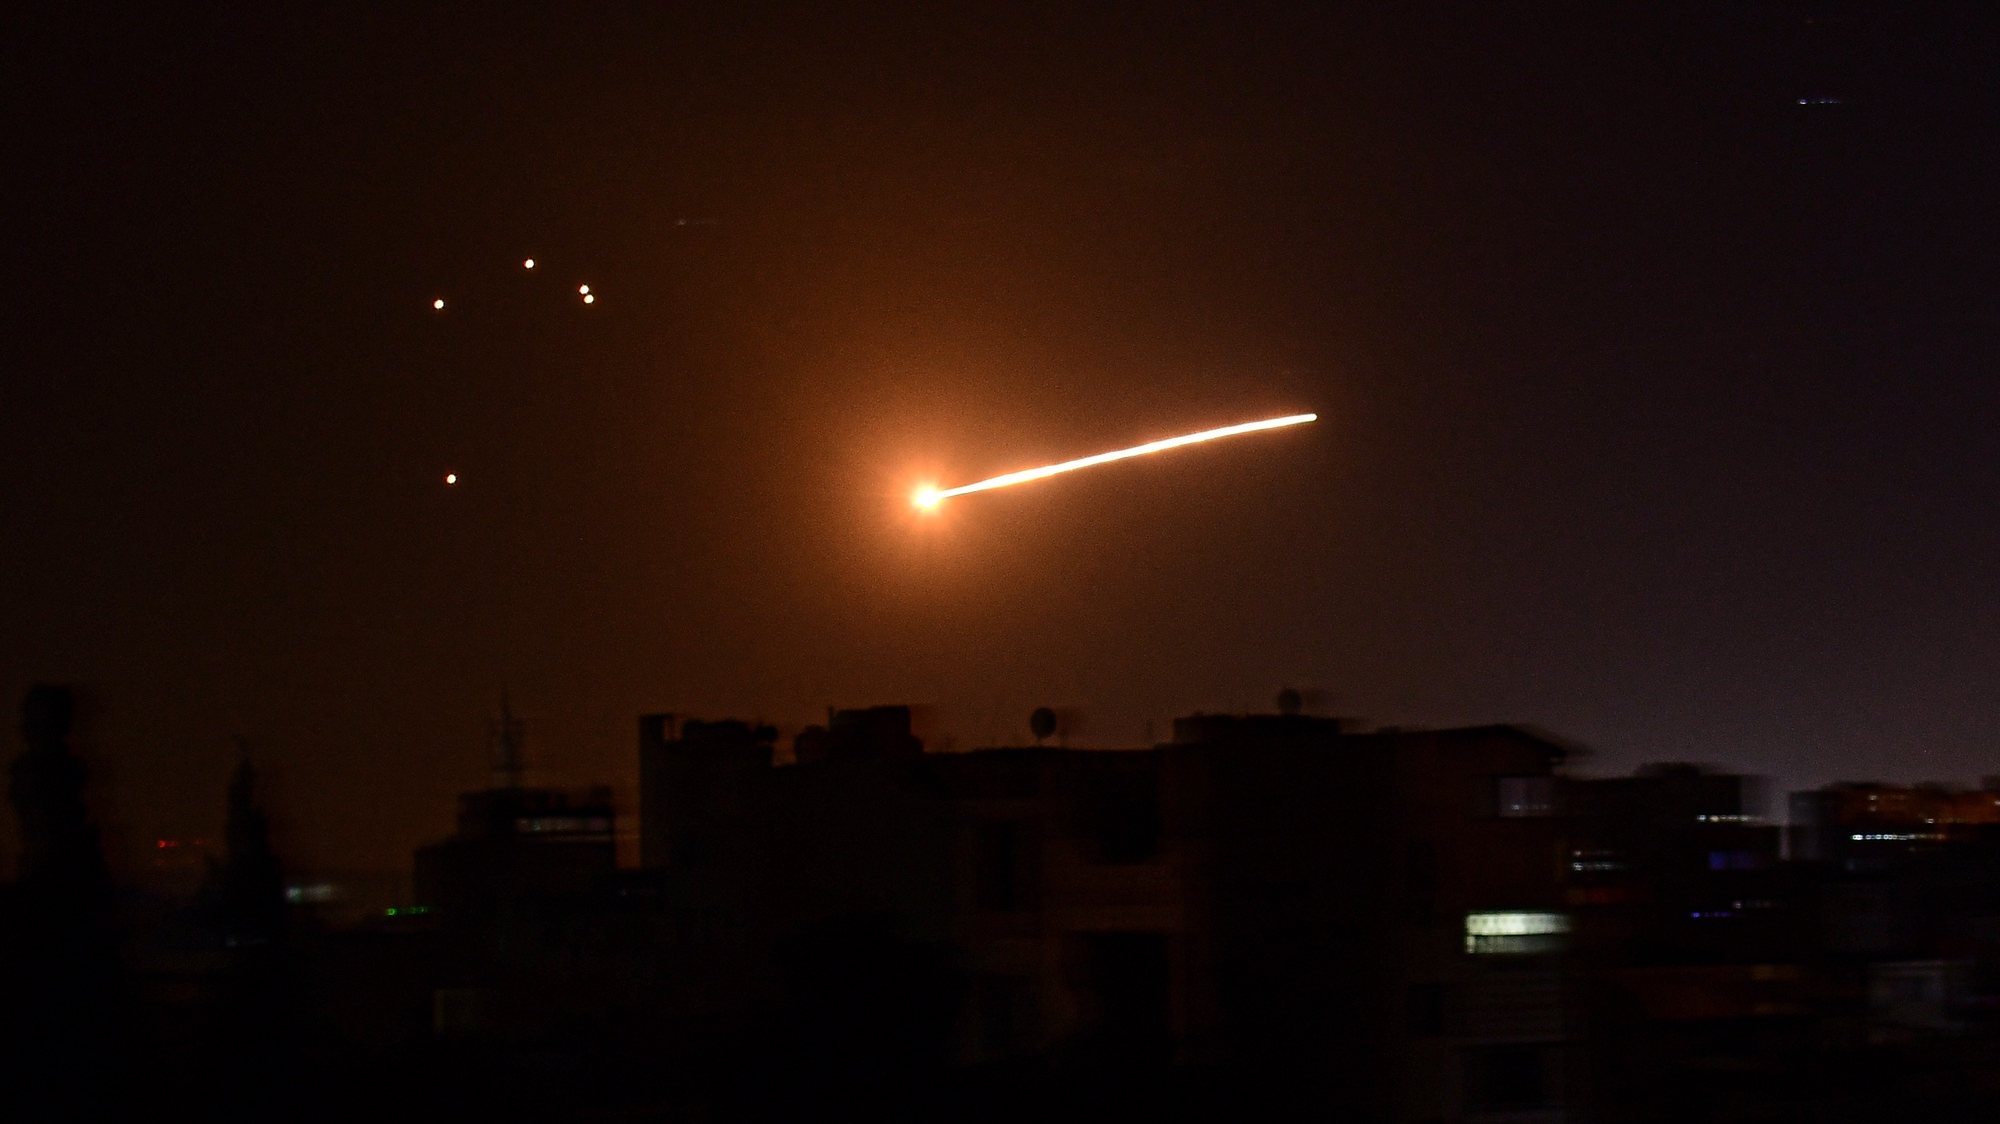 epa08243652 A handout photo made available by the official Syrian Arab News Agency (SANA) shows Syrian air defense intercepting missiles over Damascus, Syria, late 23 February 2020. According to SANA, the Syrian air defenses intercepted missiles fired by Israel from the occupied Syrian Golan heights. An Israeli army spokesman said six operatives were killed in Israeli strikes against Palestinian Islamic Jihad targets in Syria in response to rockets fired from Gaza toward Israel.  EPA/SANA HANDOUT  HANDOUT EDITORIAL USE ONLY/NO SALES